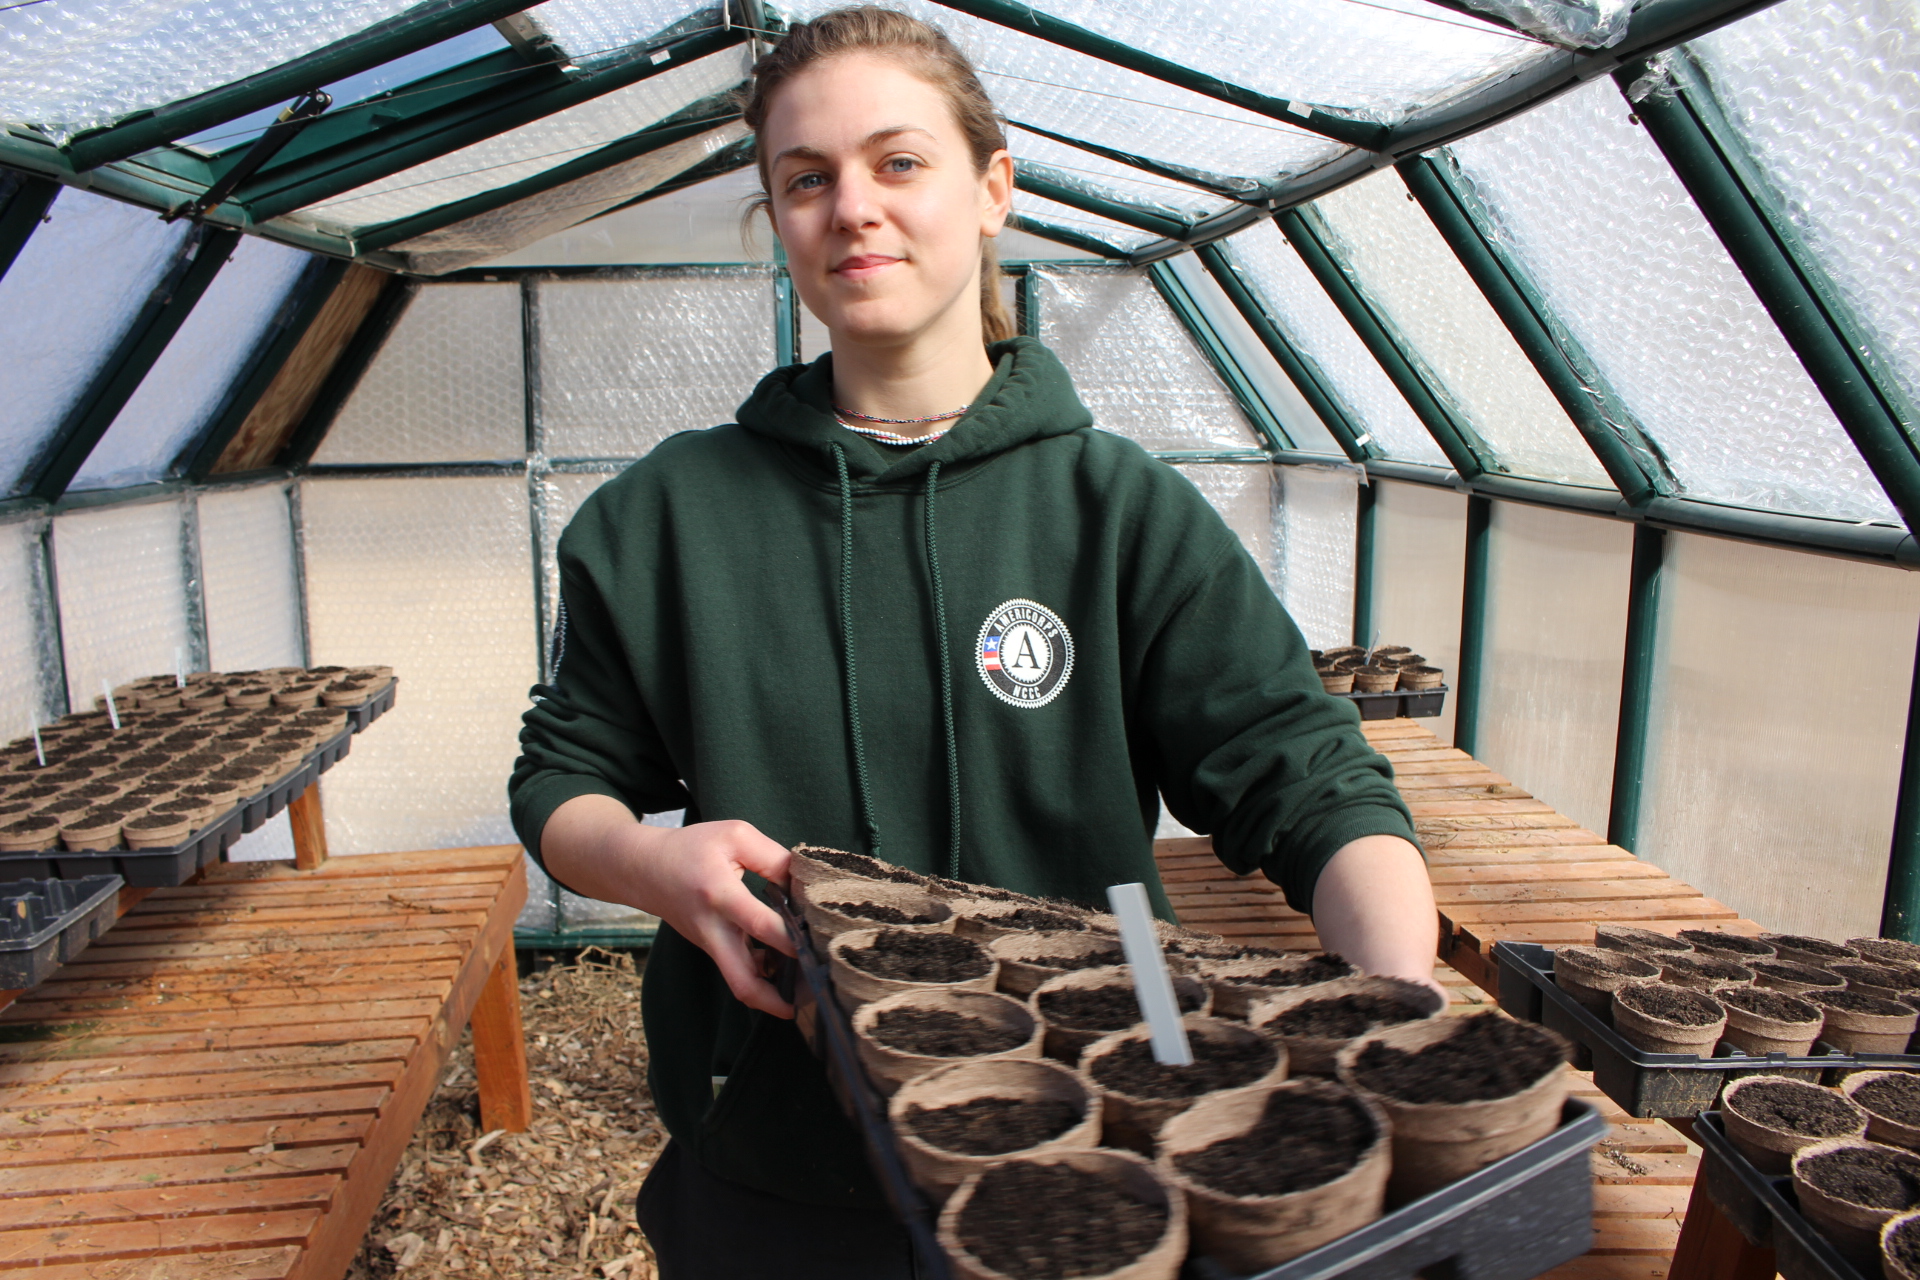 An NCCC member works with plants in a greenhouse